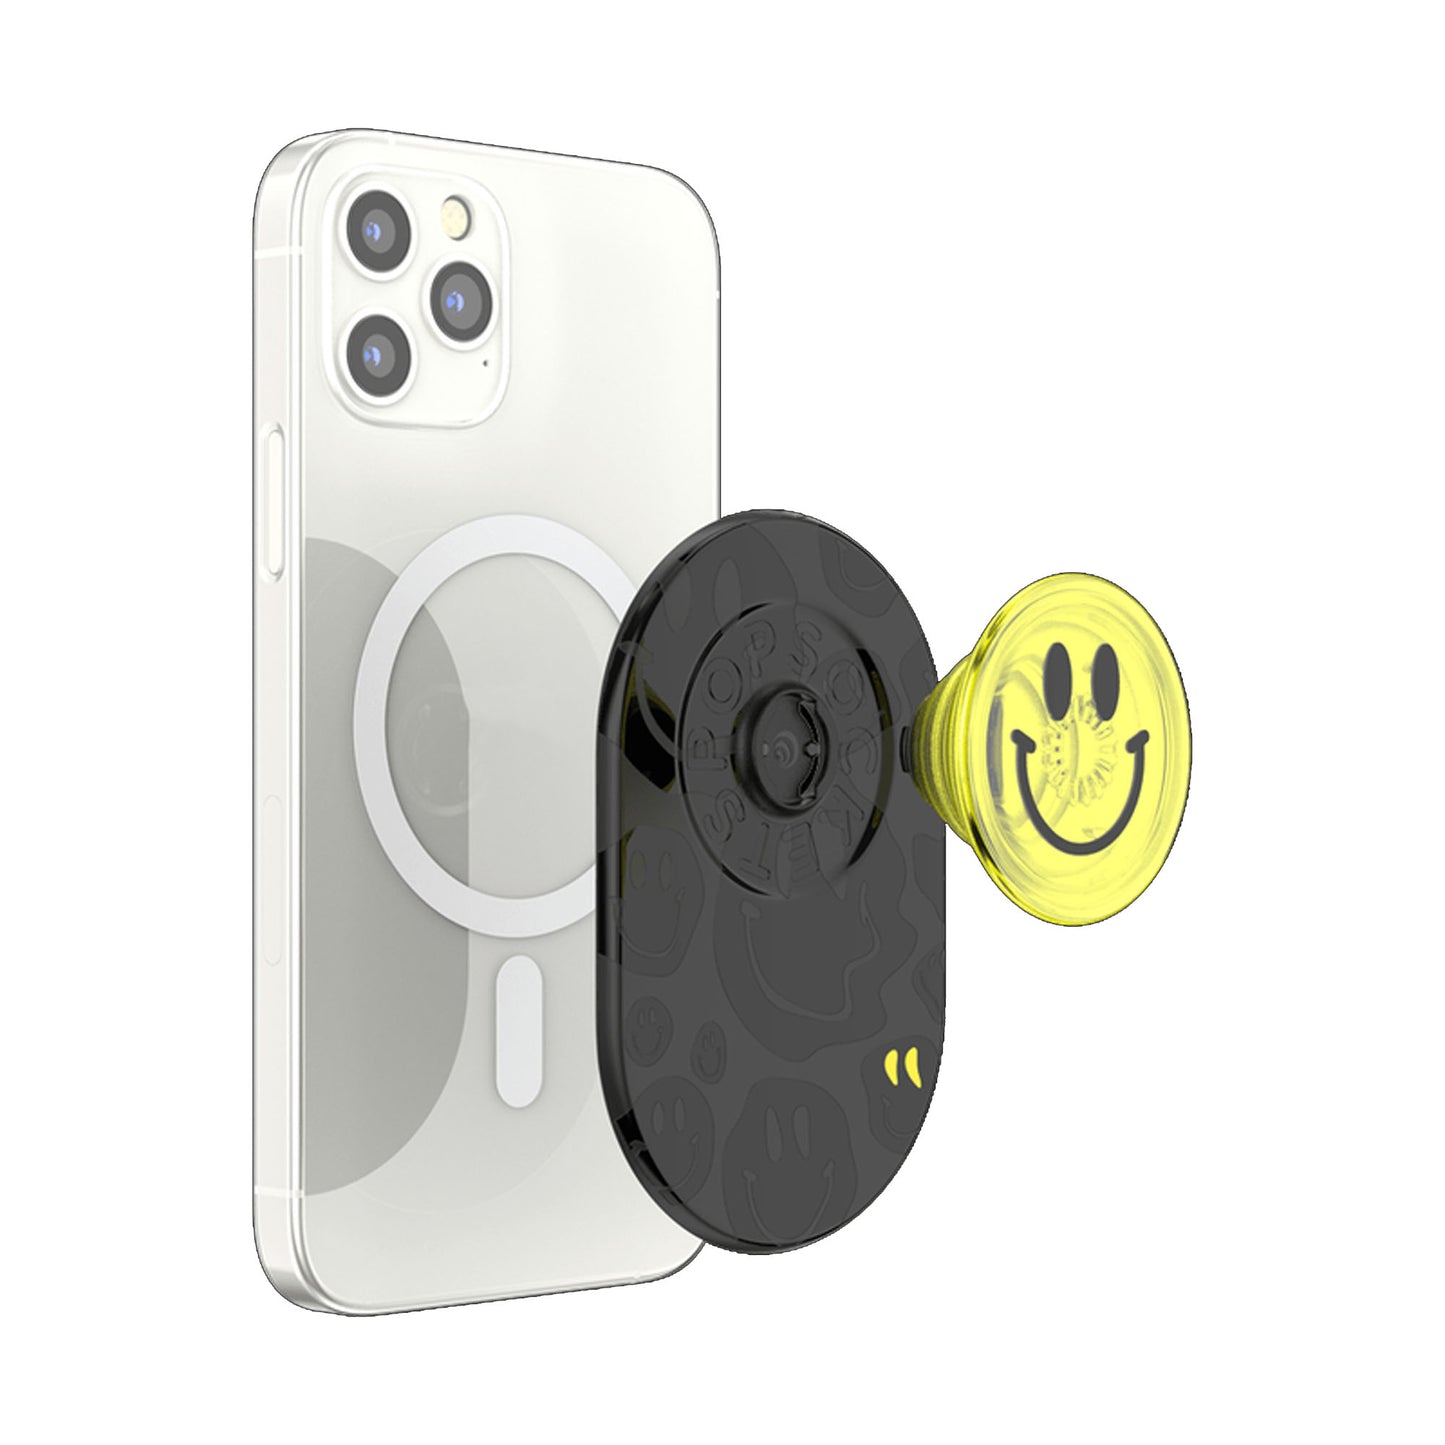 PopSockets Popgrip for Magsafe Magnetic phone grip and stand - All Smiles (Barcode : 840173720899 )